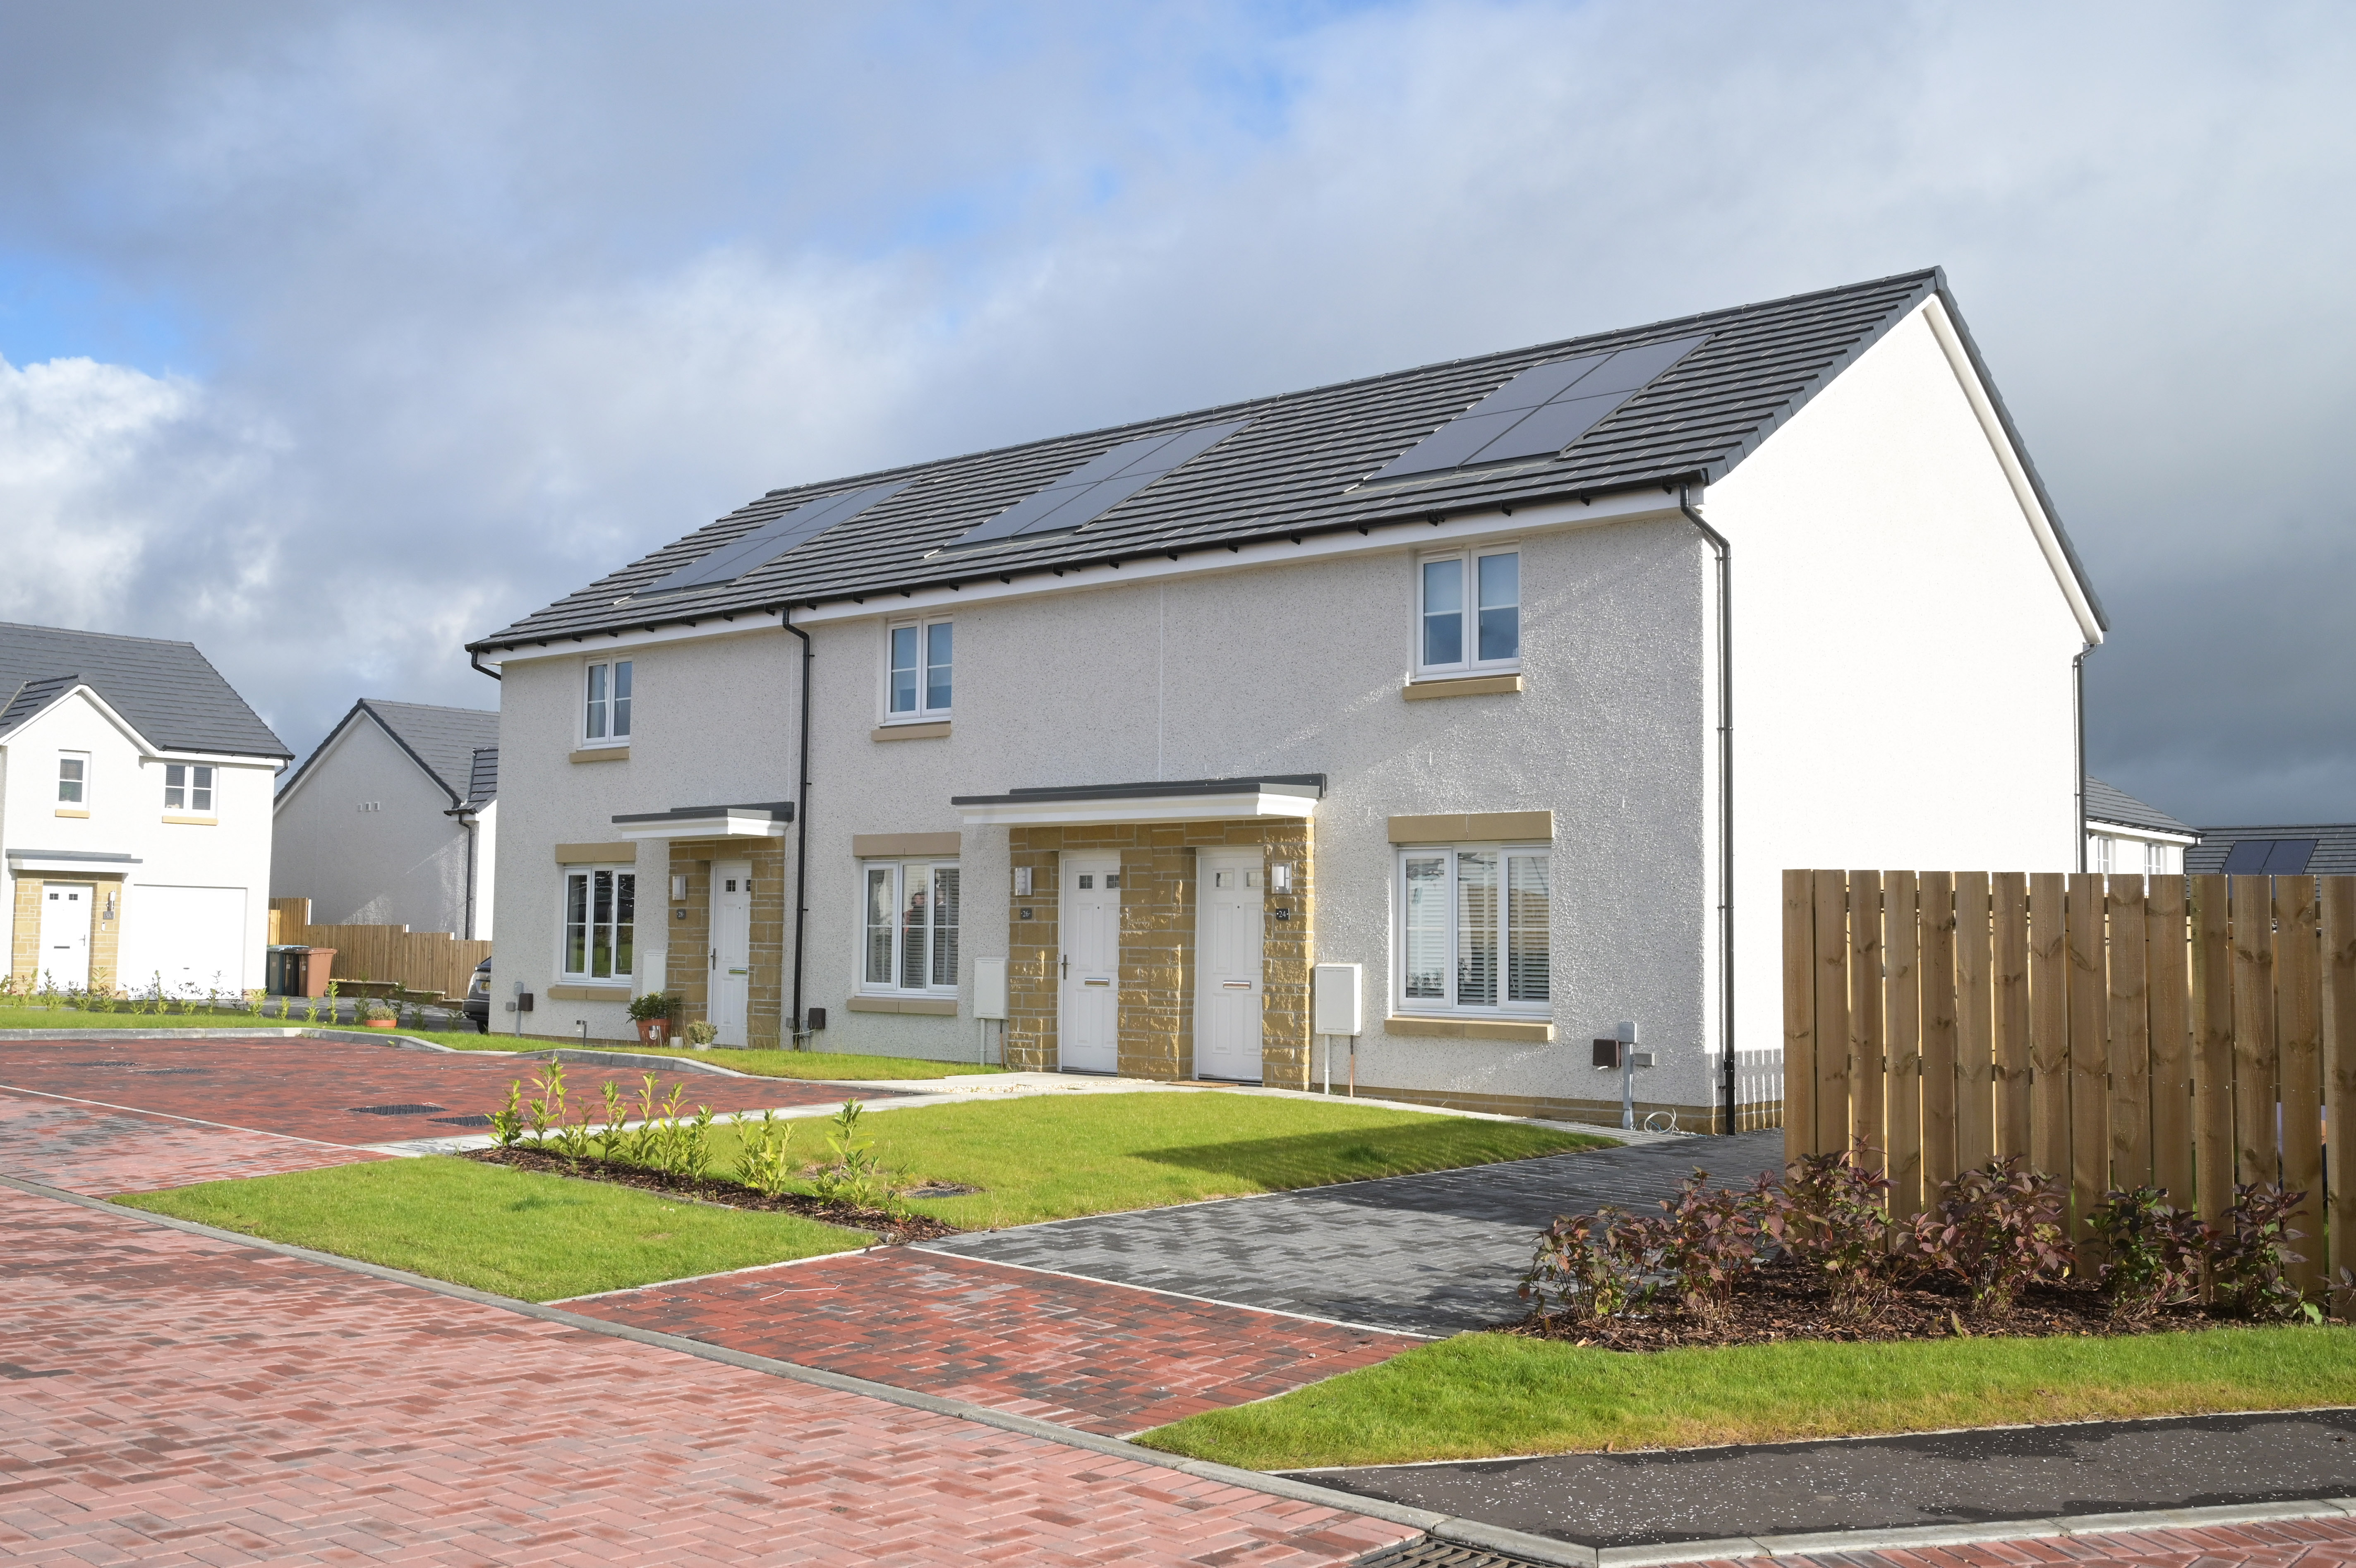 Photo of New Homes At Buttercup Crescent 